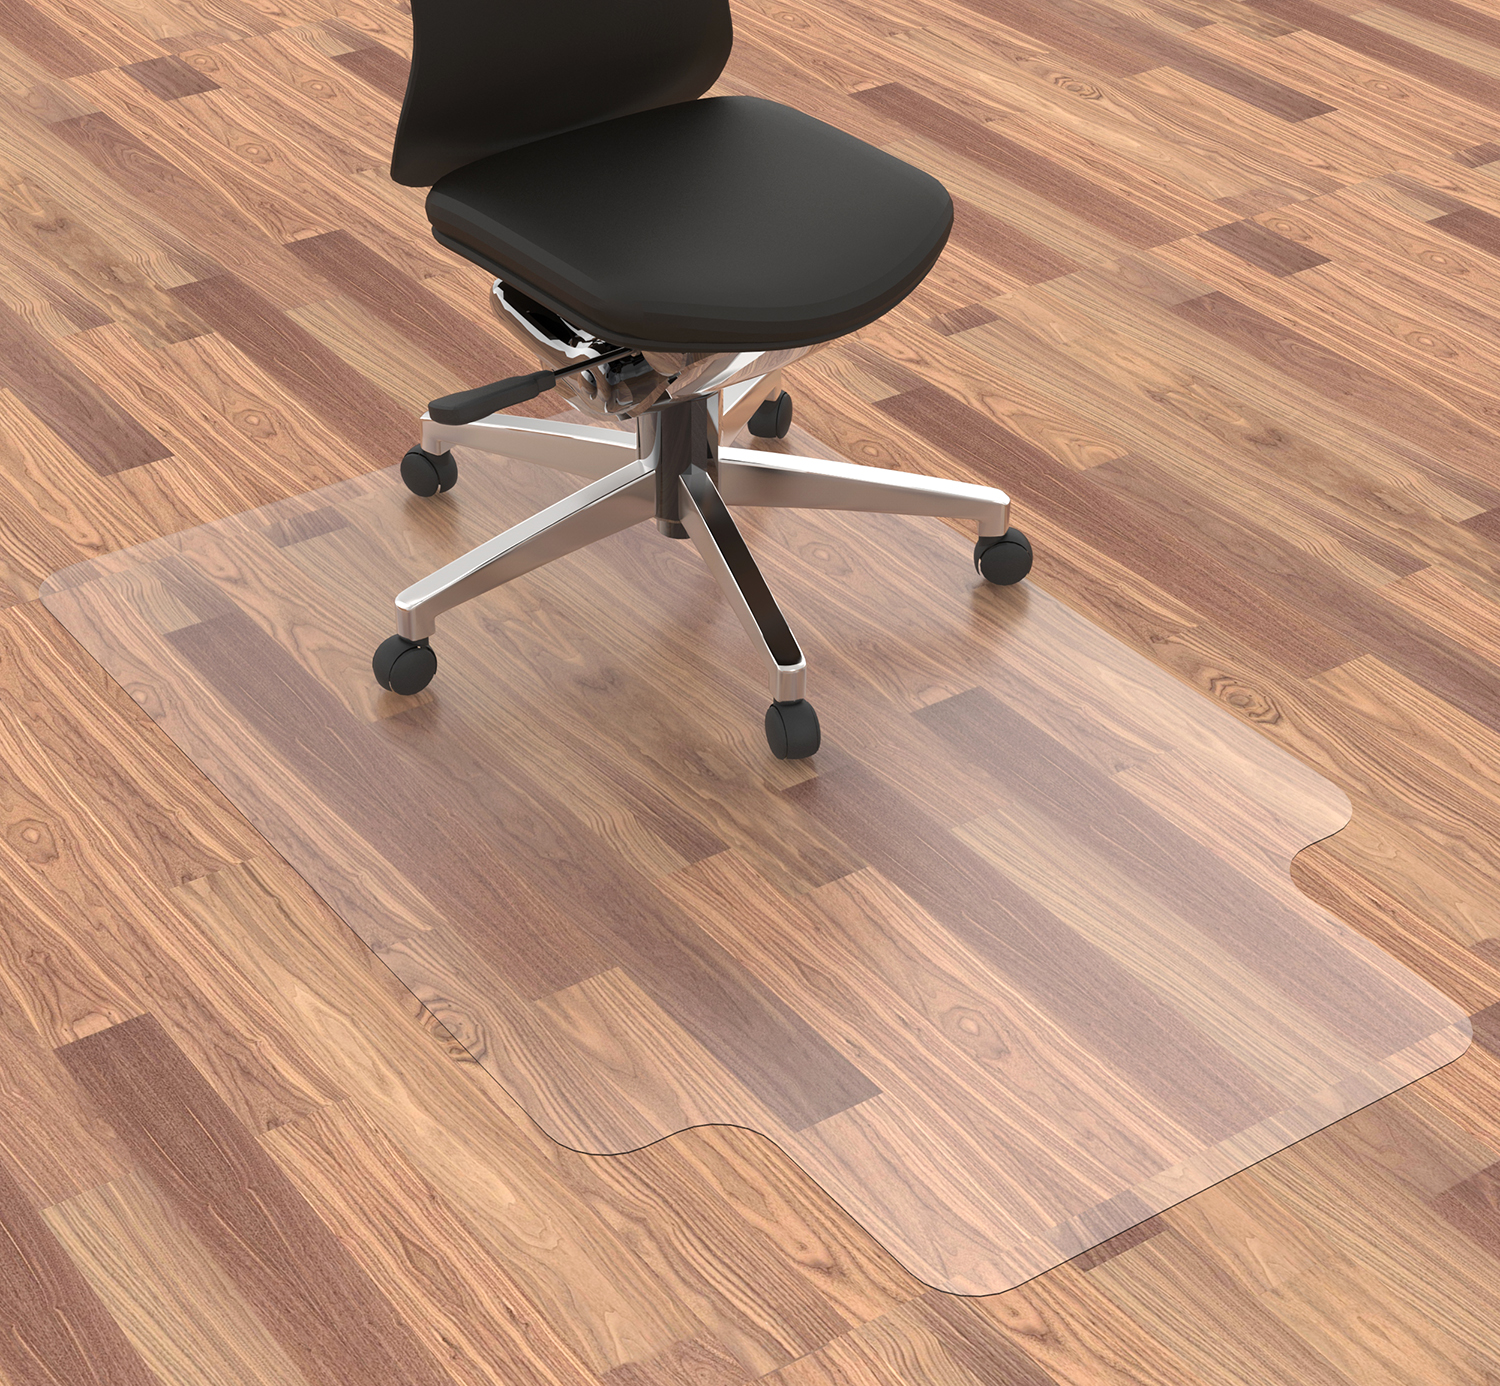 Polycarbonate Office Chair Mat for Hardwood Floors